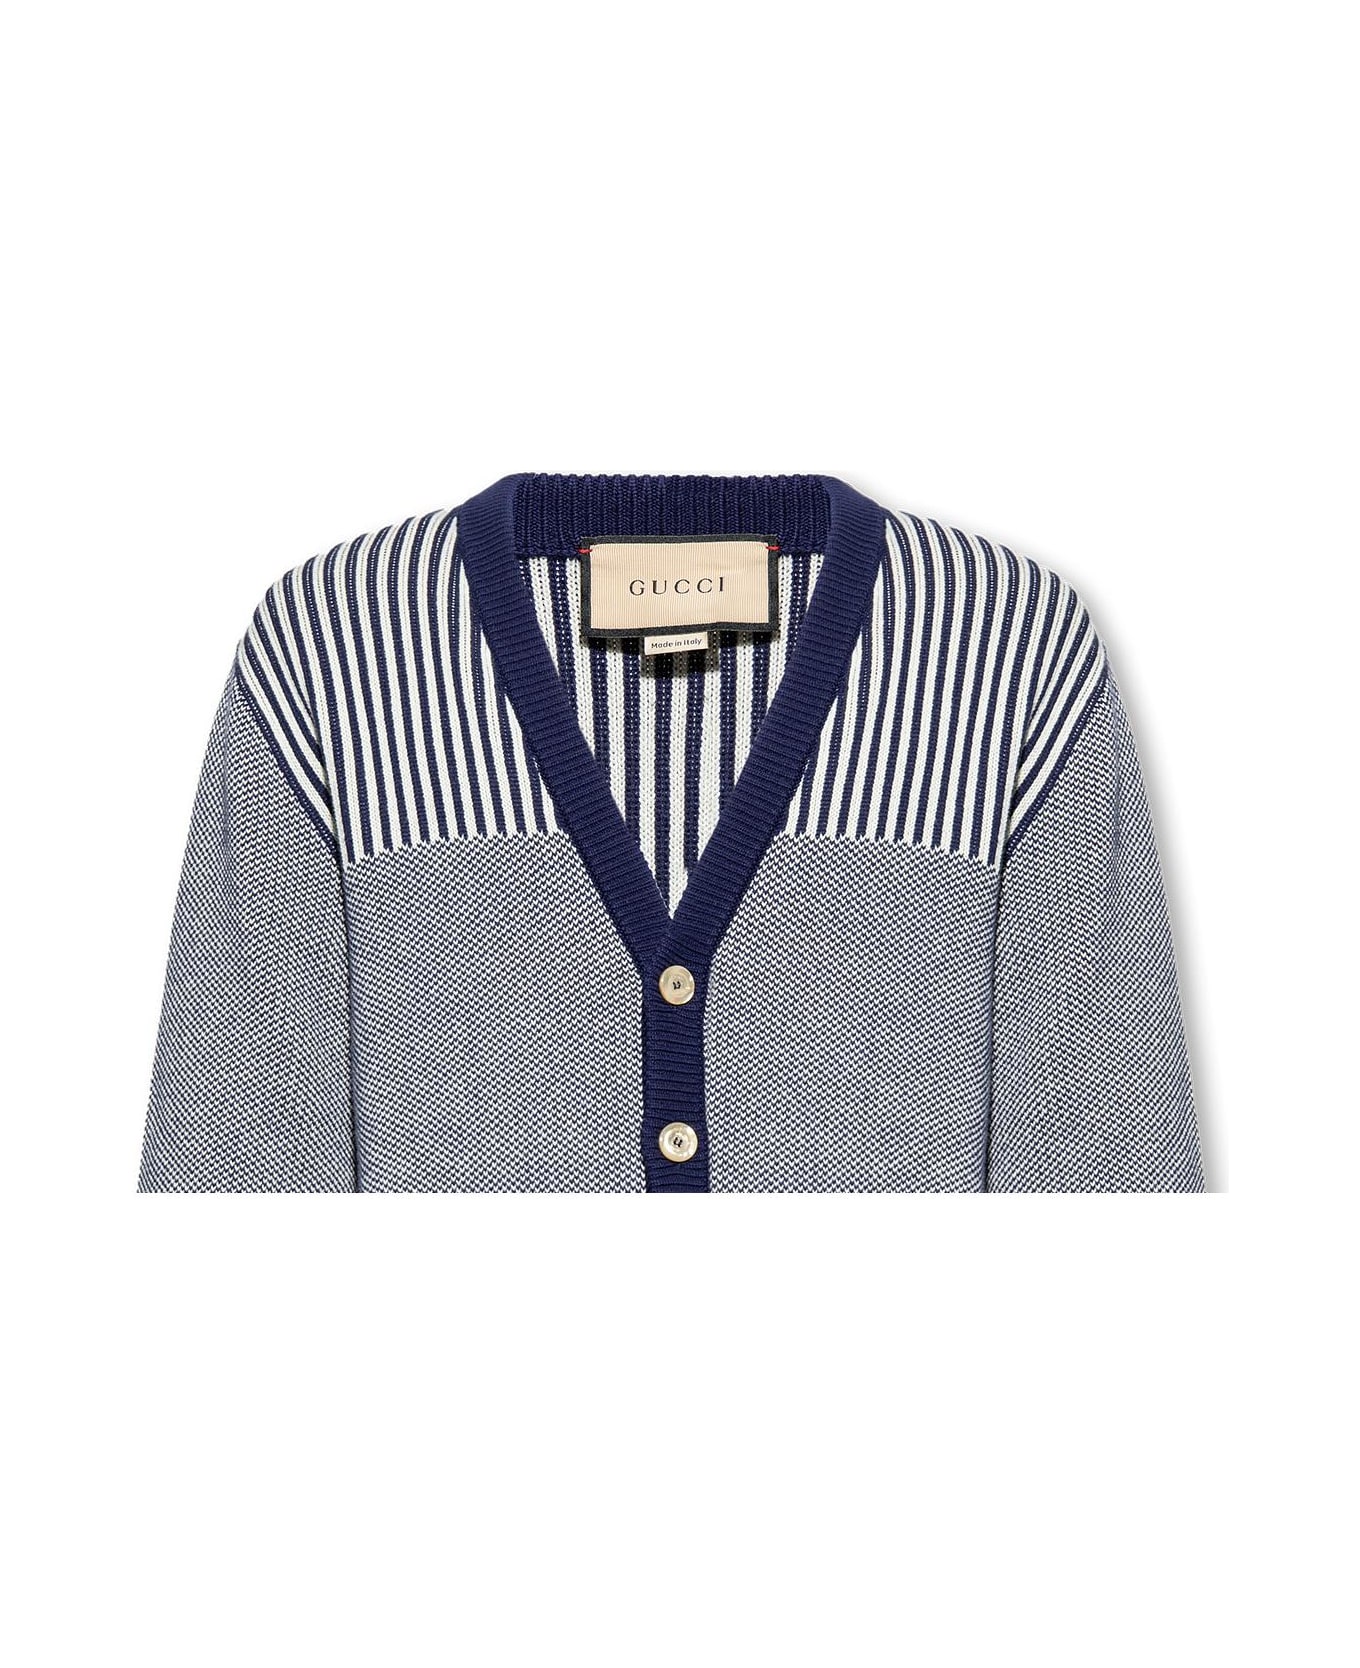 Gucci Cardigan With Buttons - Blue